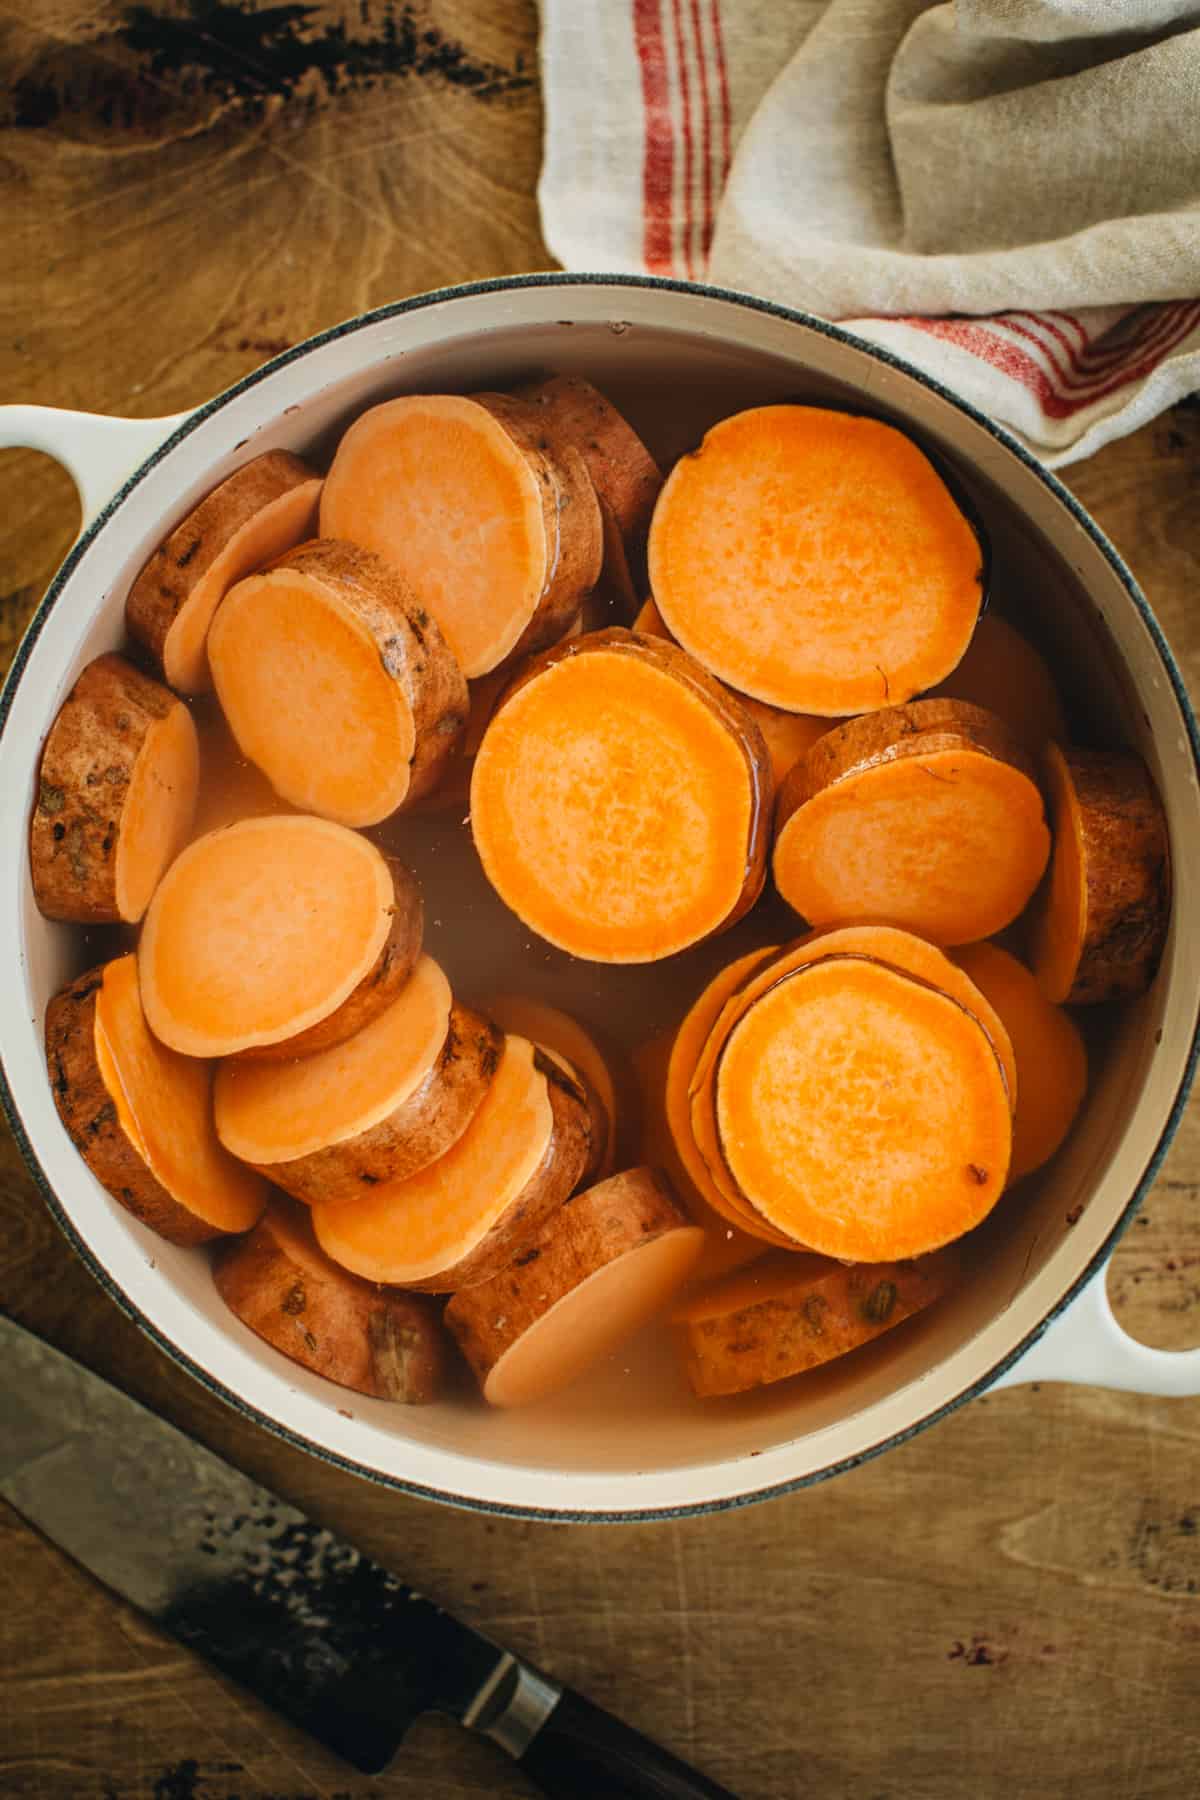 Sliced sweet potatoes in a large pot filled with water ready to boil for making smashed sweet potatoes.